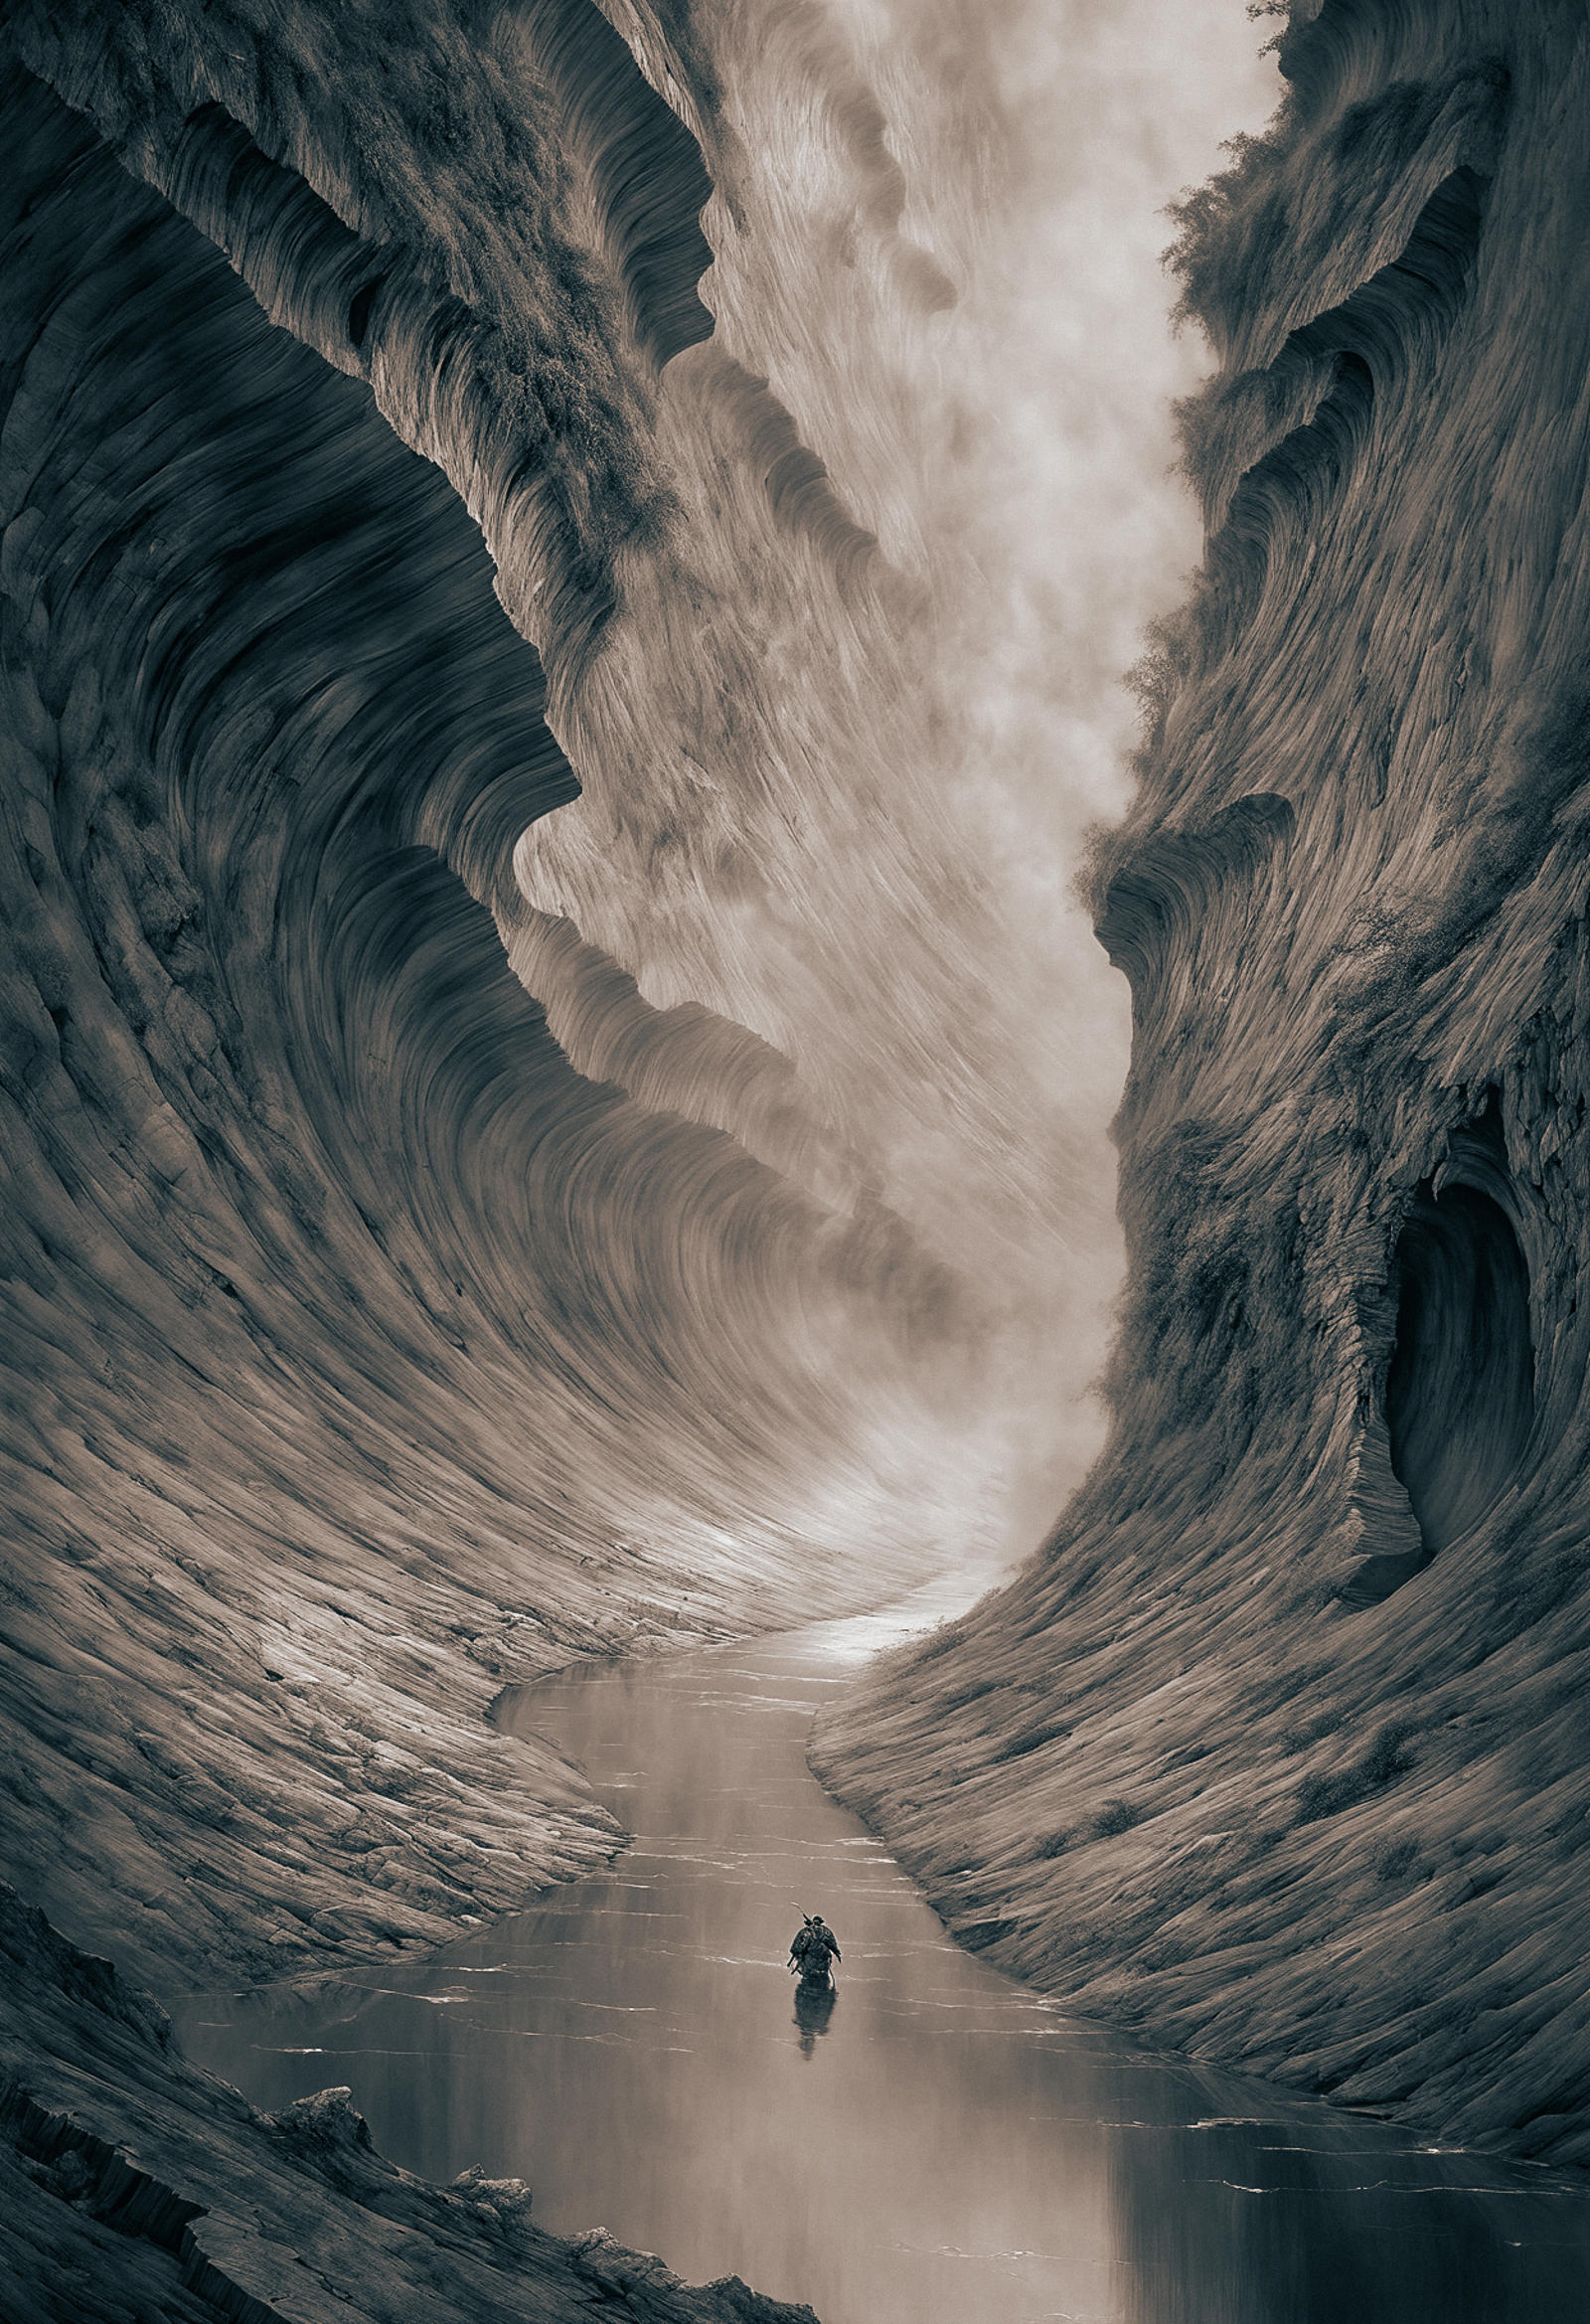 A person riding a surfboard on a massive wave in black and white.